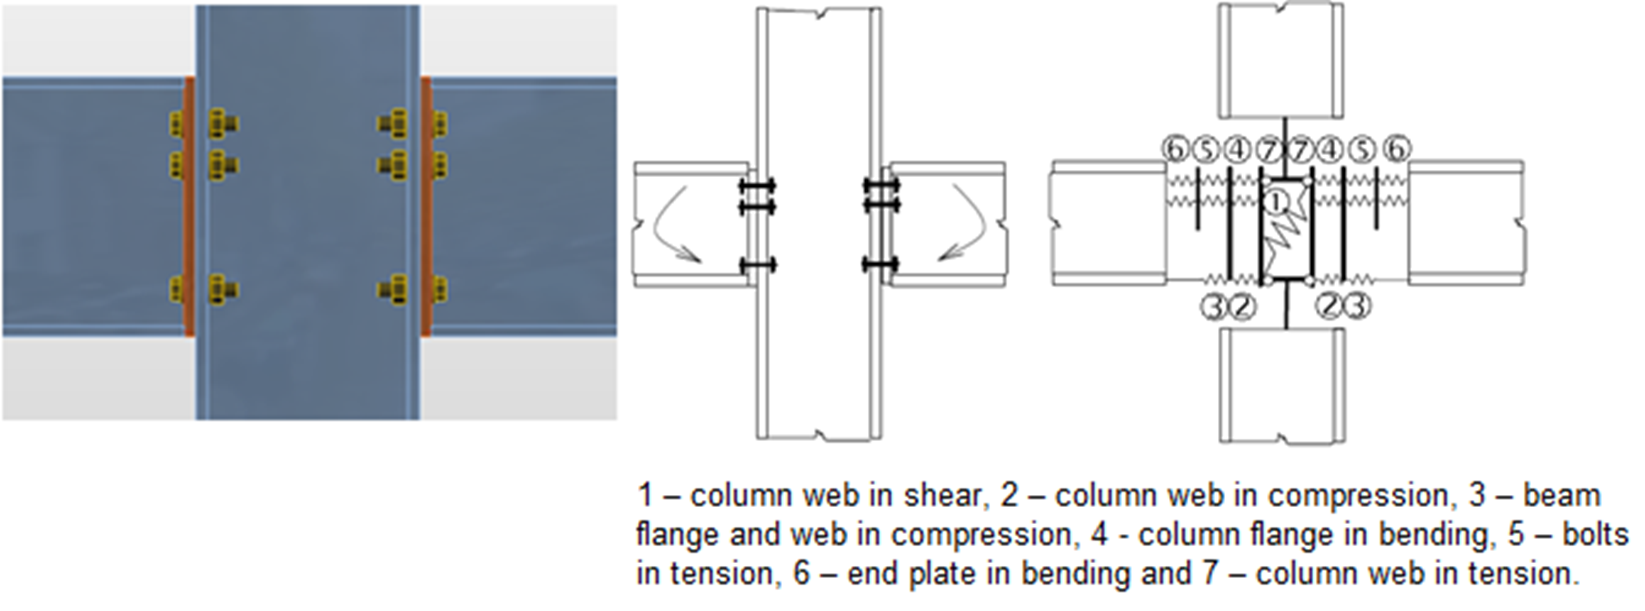 IDEA StatiCa Connection theoretical background for the advanced structural design of steel connections.  Structural design of welded and bolted steel connections using the Component Based Finite Element Model CBFEM).